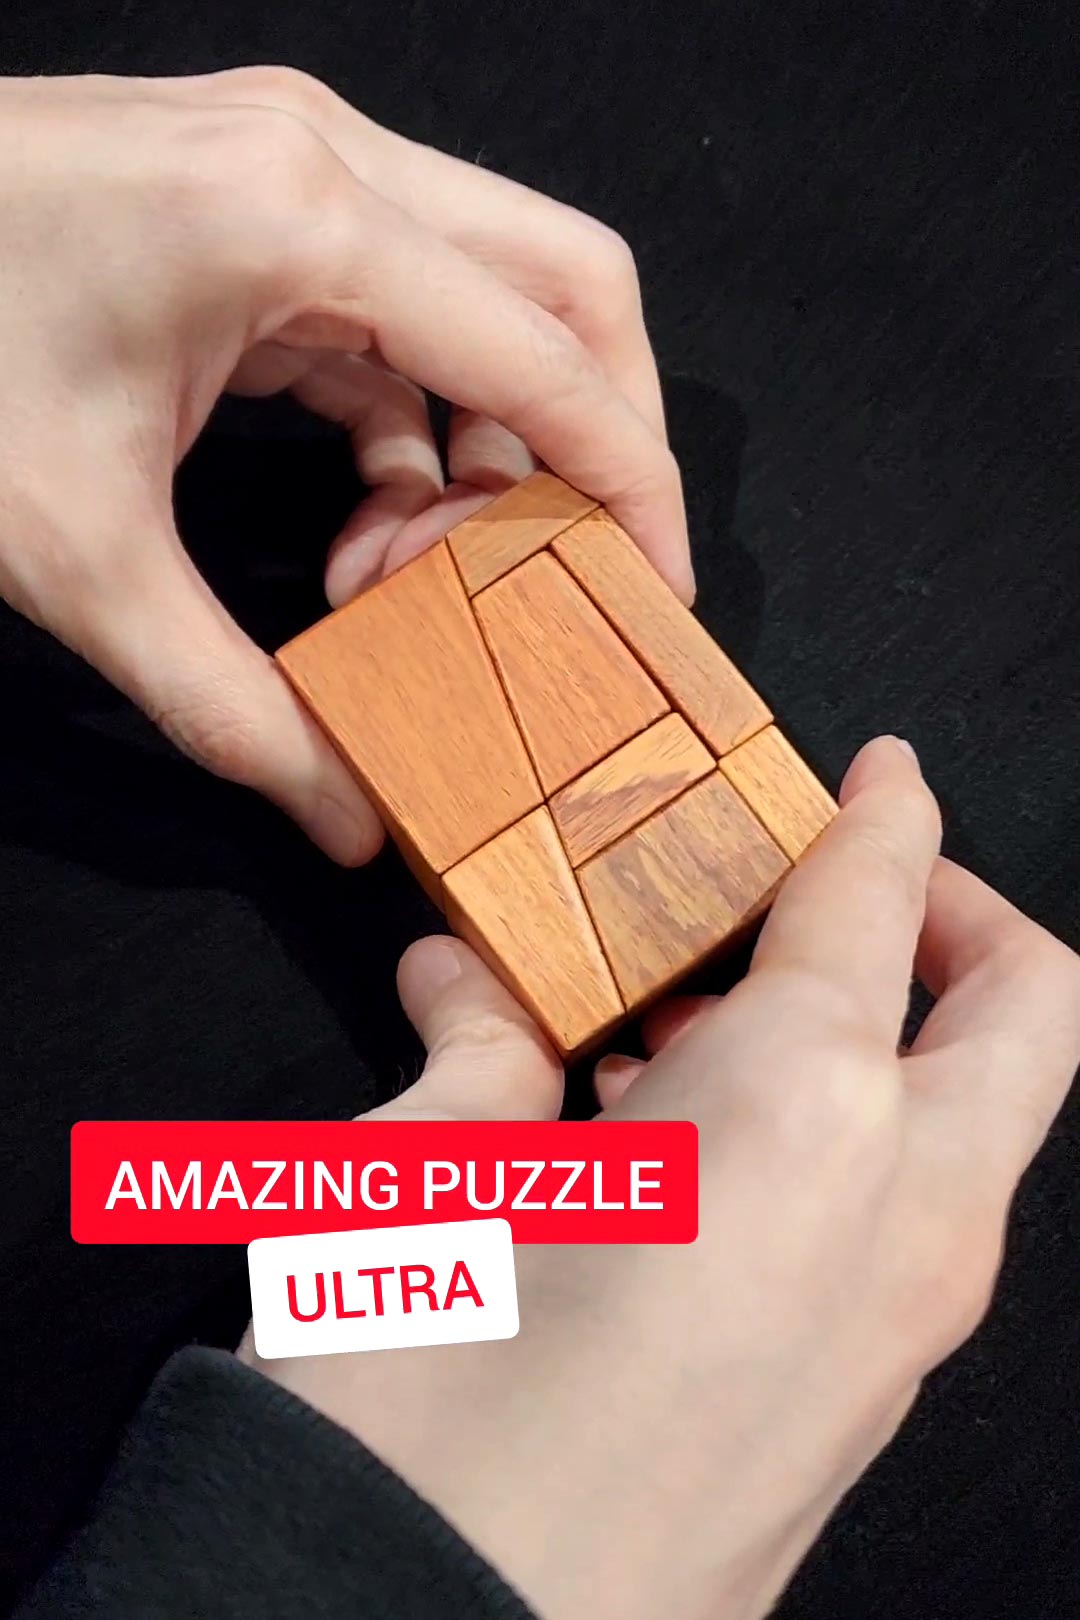 How does it work? The Amazing Puzzle Ultra